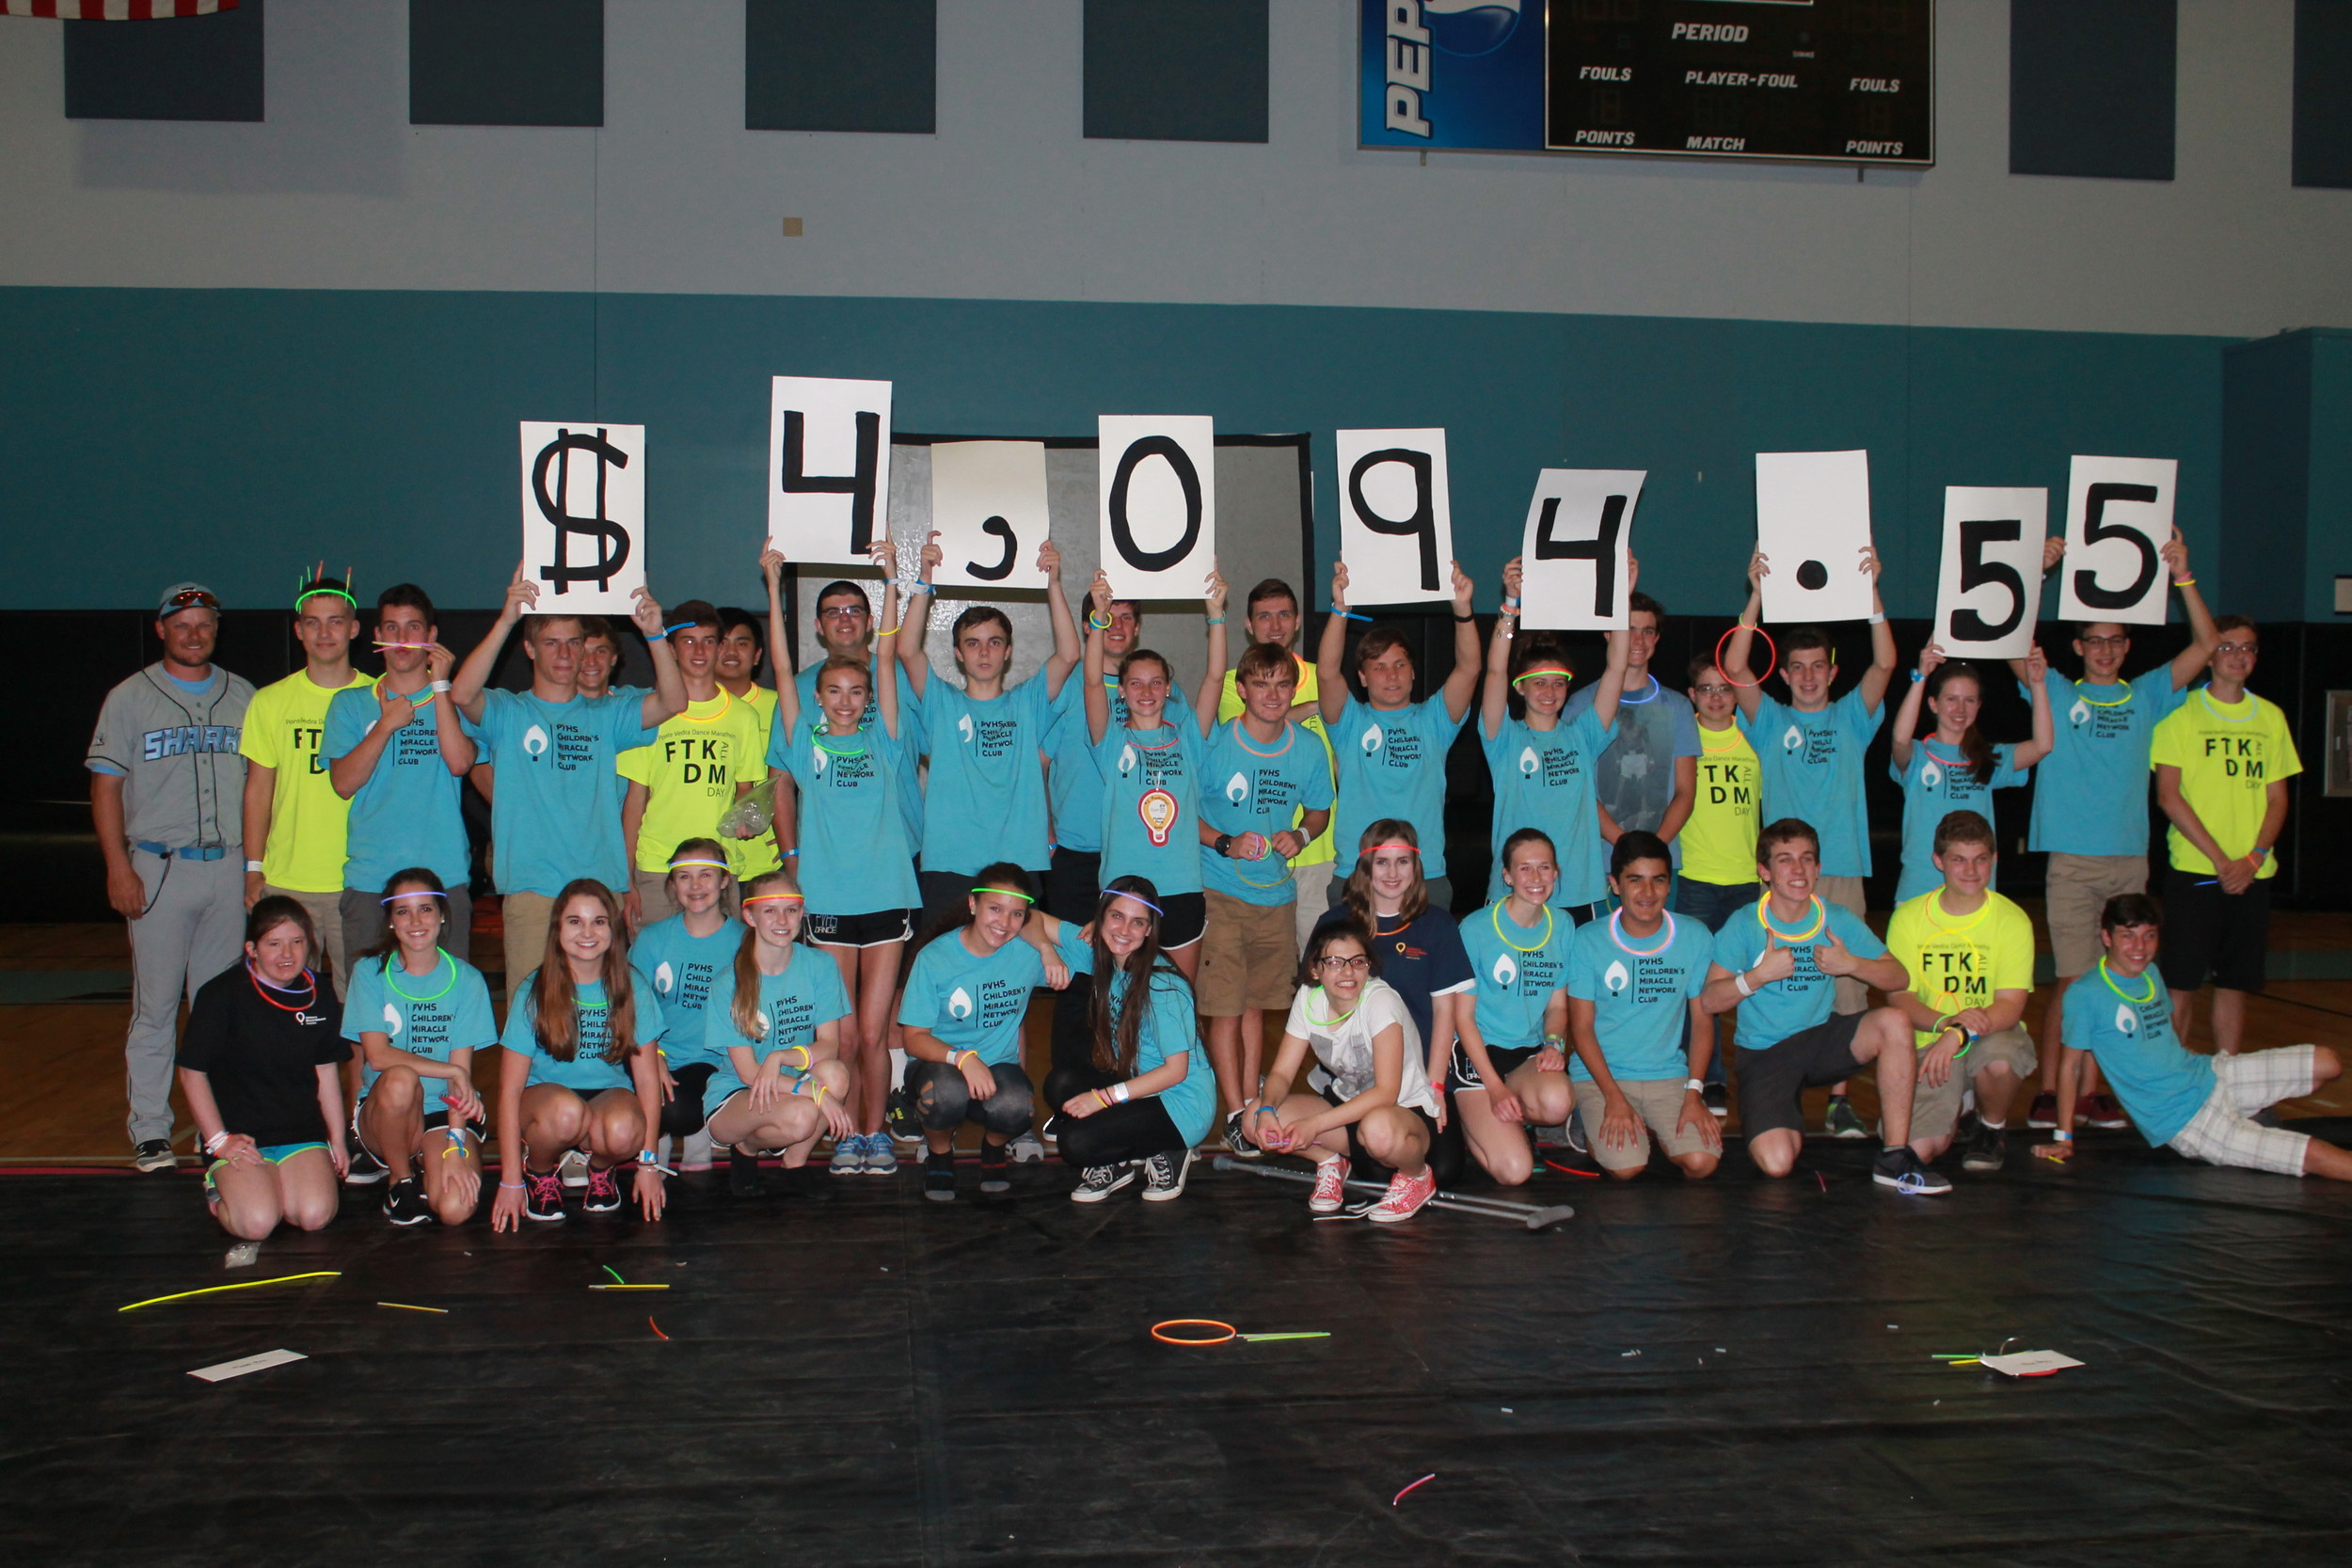 PVHS students display the total amount raised at their recent dance marathon held to benefit the Children’s Miracle Network